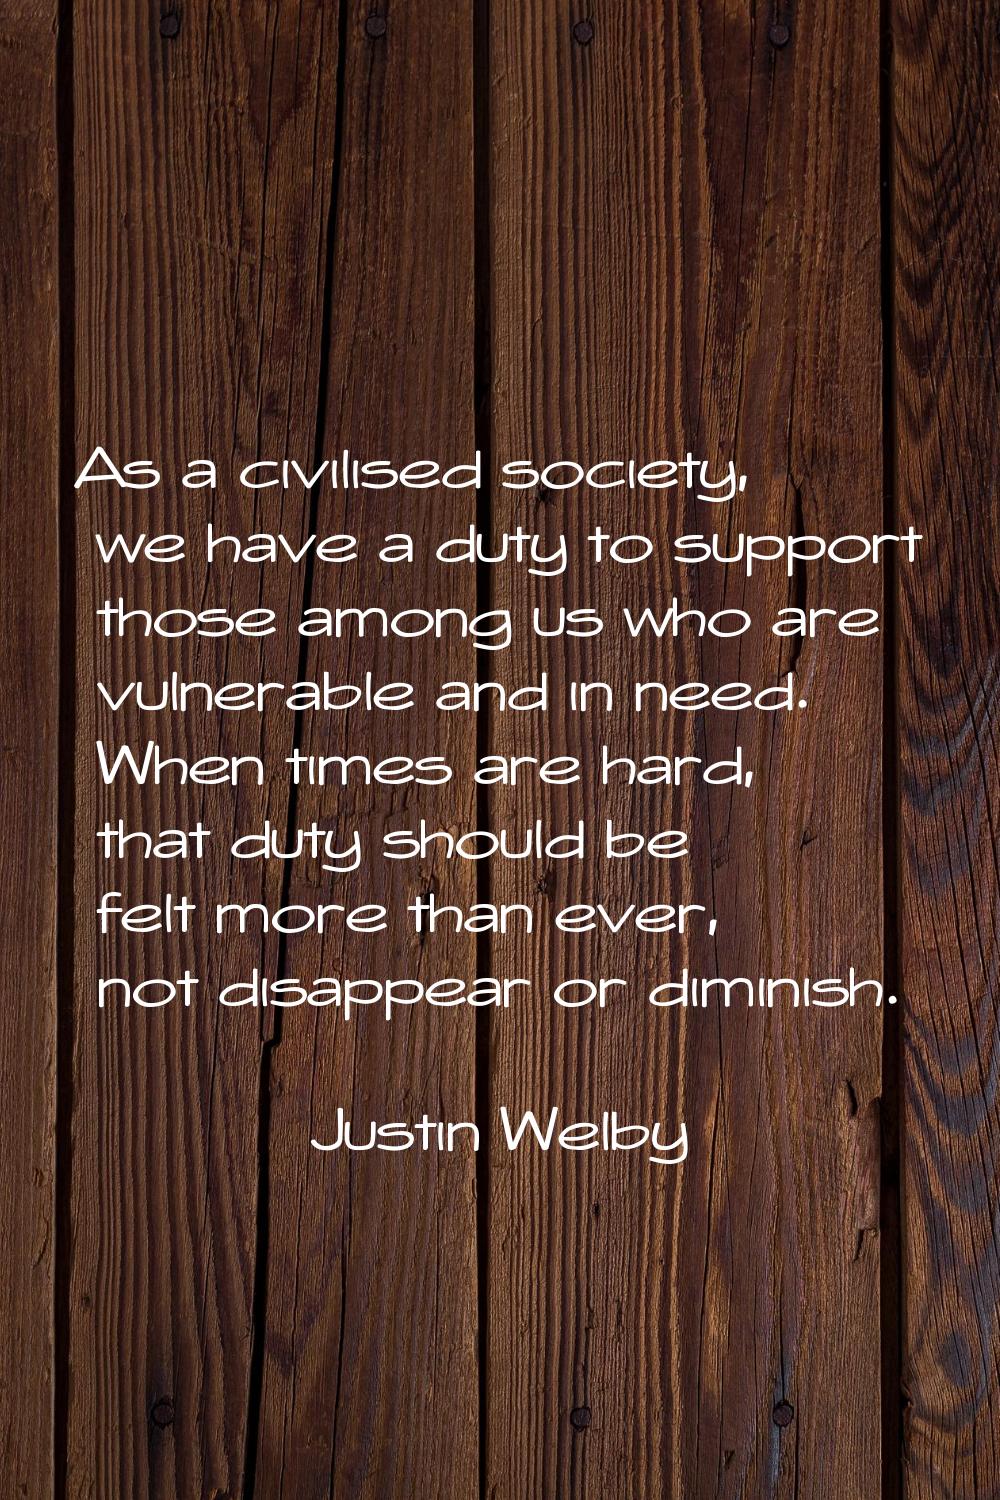 As a civilised society, we have a duty to support those among us who are vulnerable and in need. Wh